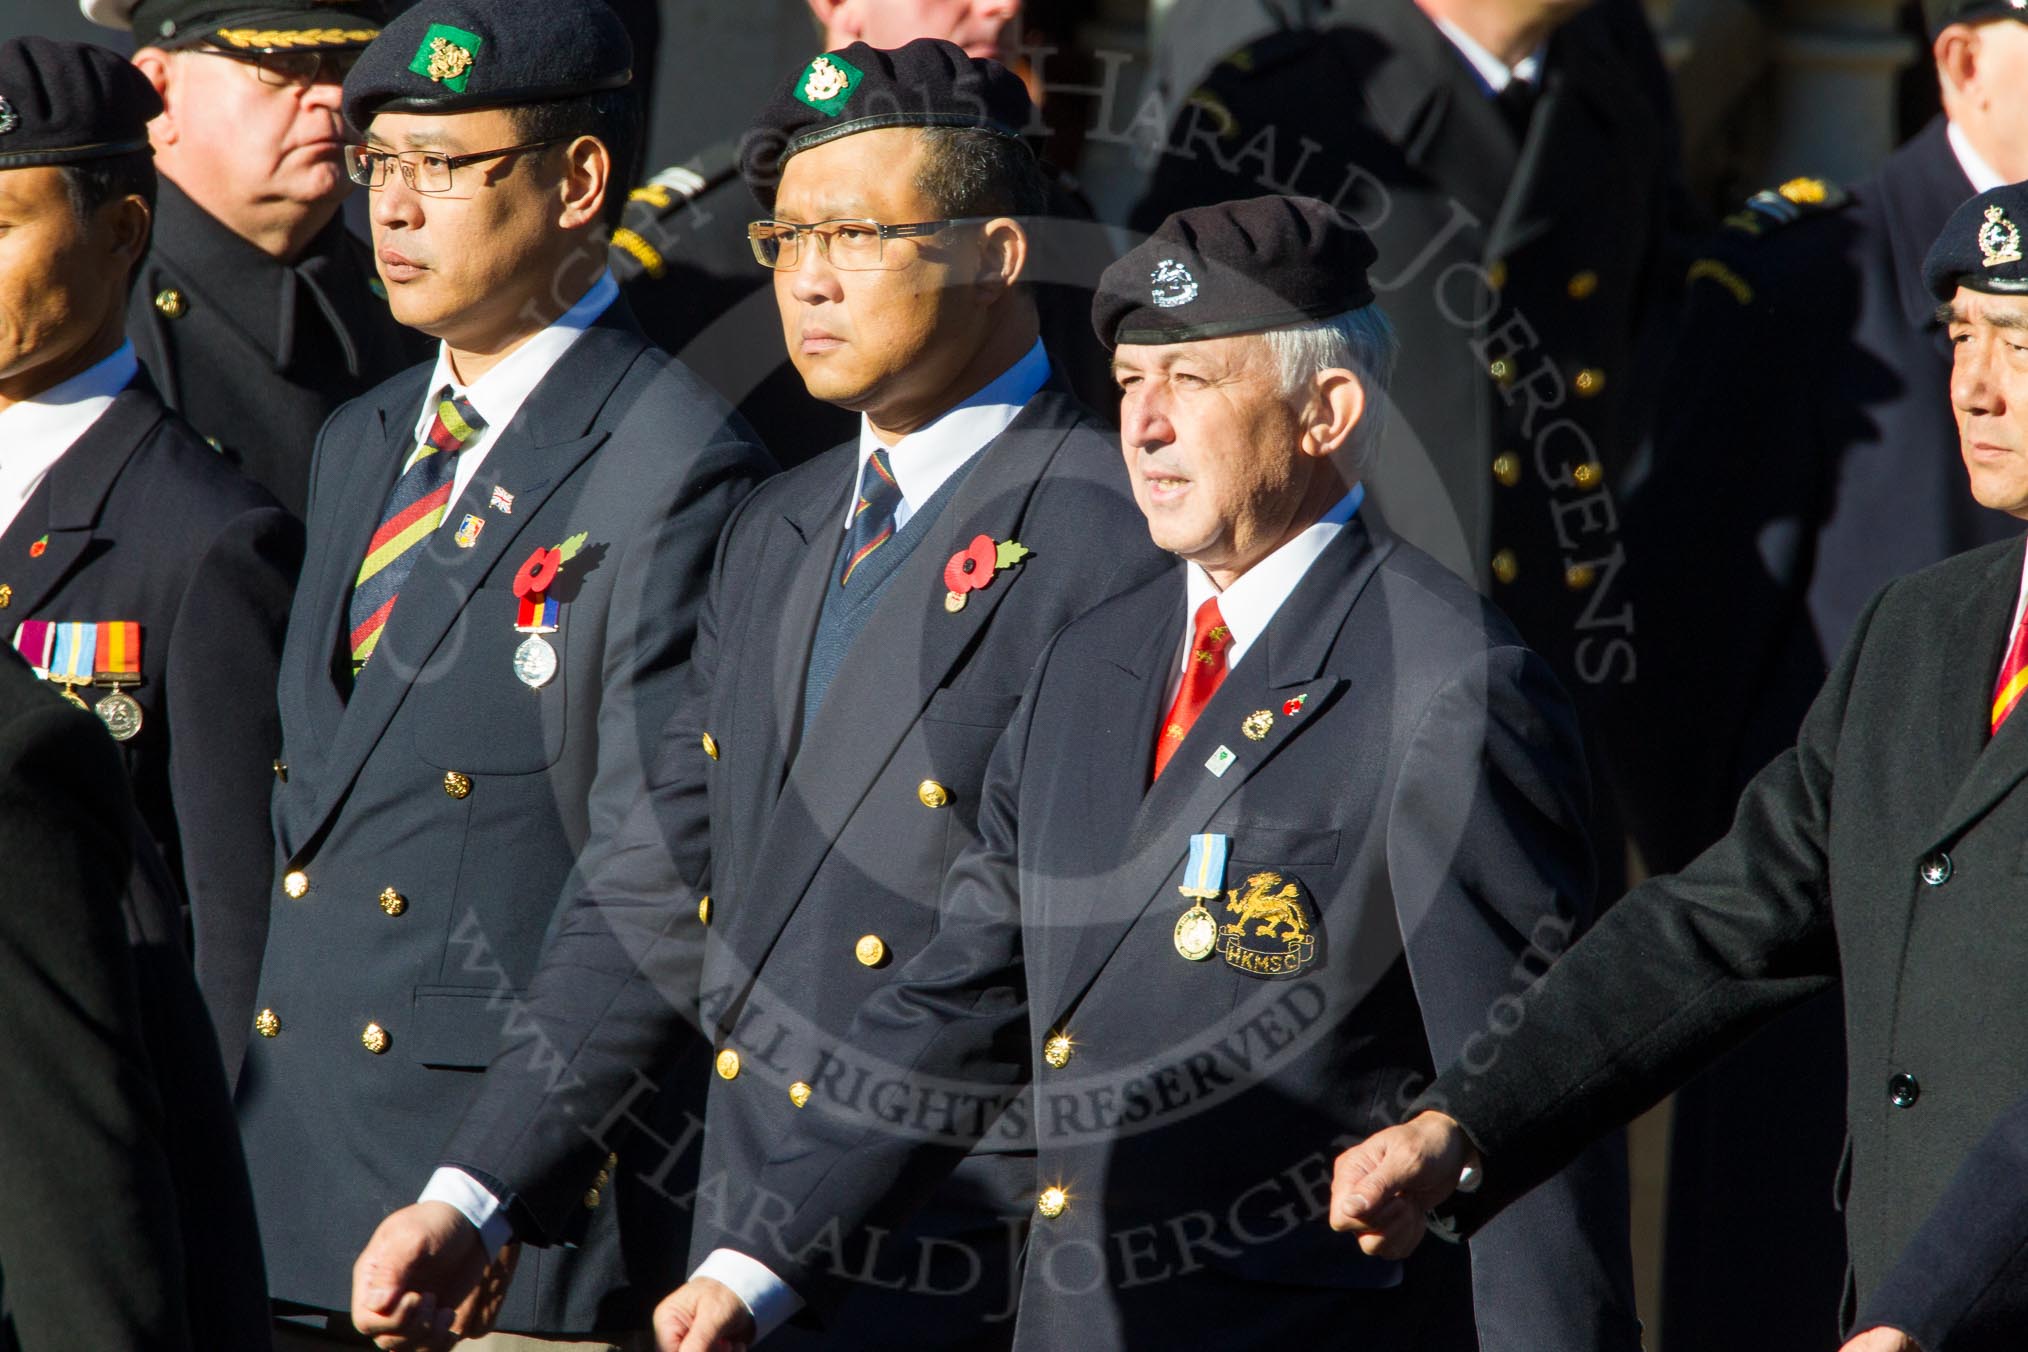 Remembrance Sunday Cenotaph March Past 2013: D10 - Hong Kong Military Service Corps..
Press stand opposite the Foreign Office building, Whitehall, London SW1,
London,
Greater London,
United Kingdom,
on 10 November 2013 at 11:39, image #82